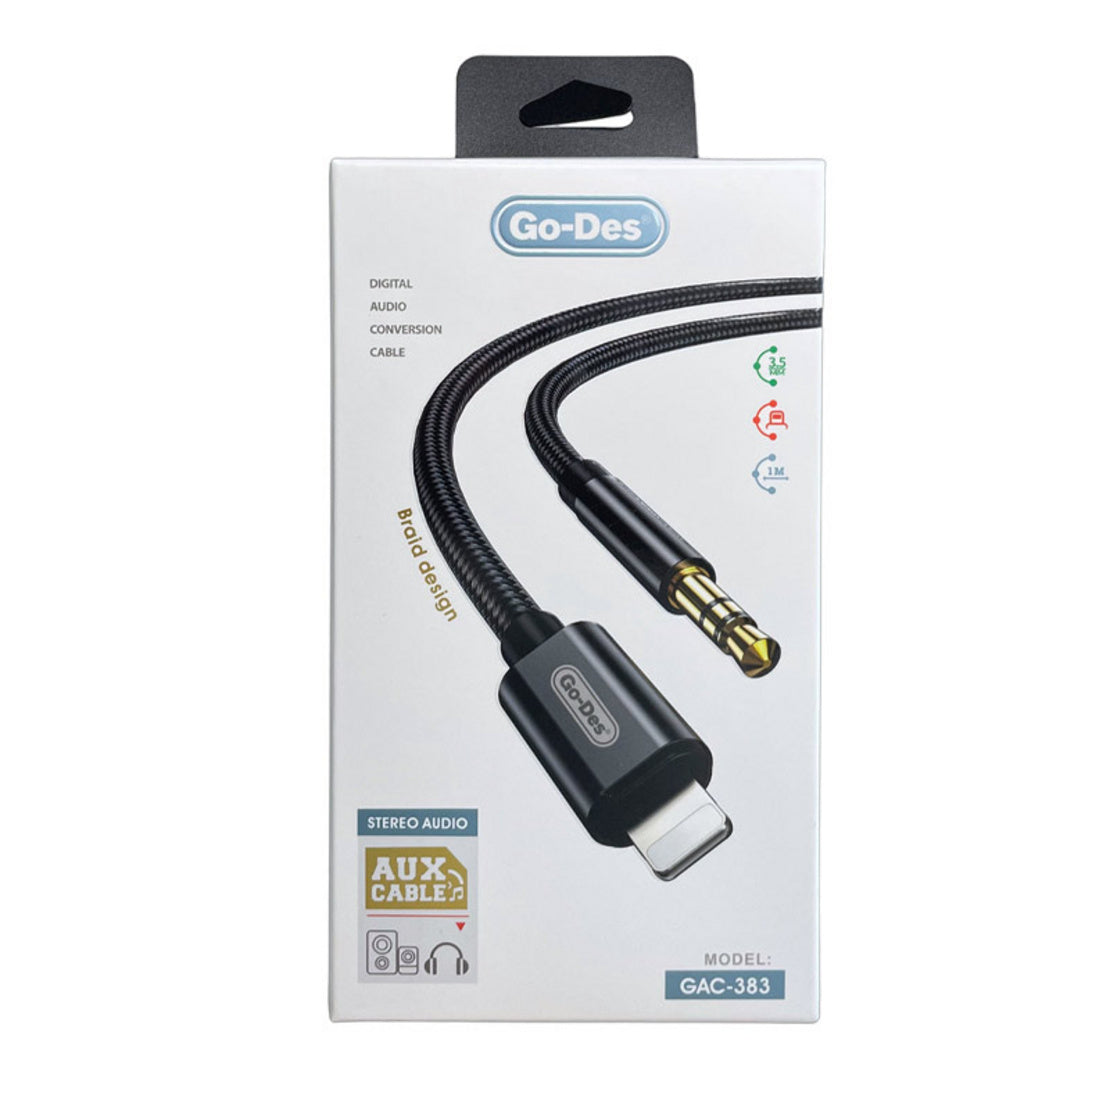 GO-DES Adapter Cable Audio Experience with AUX Connectivity